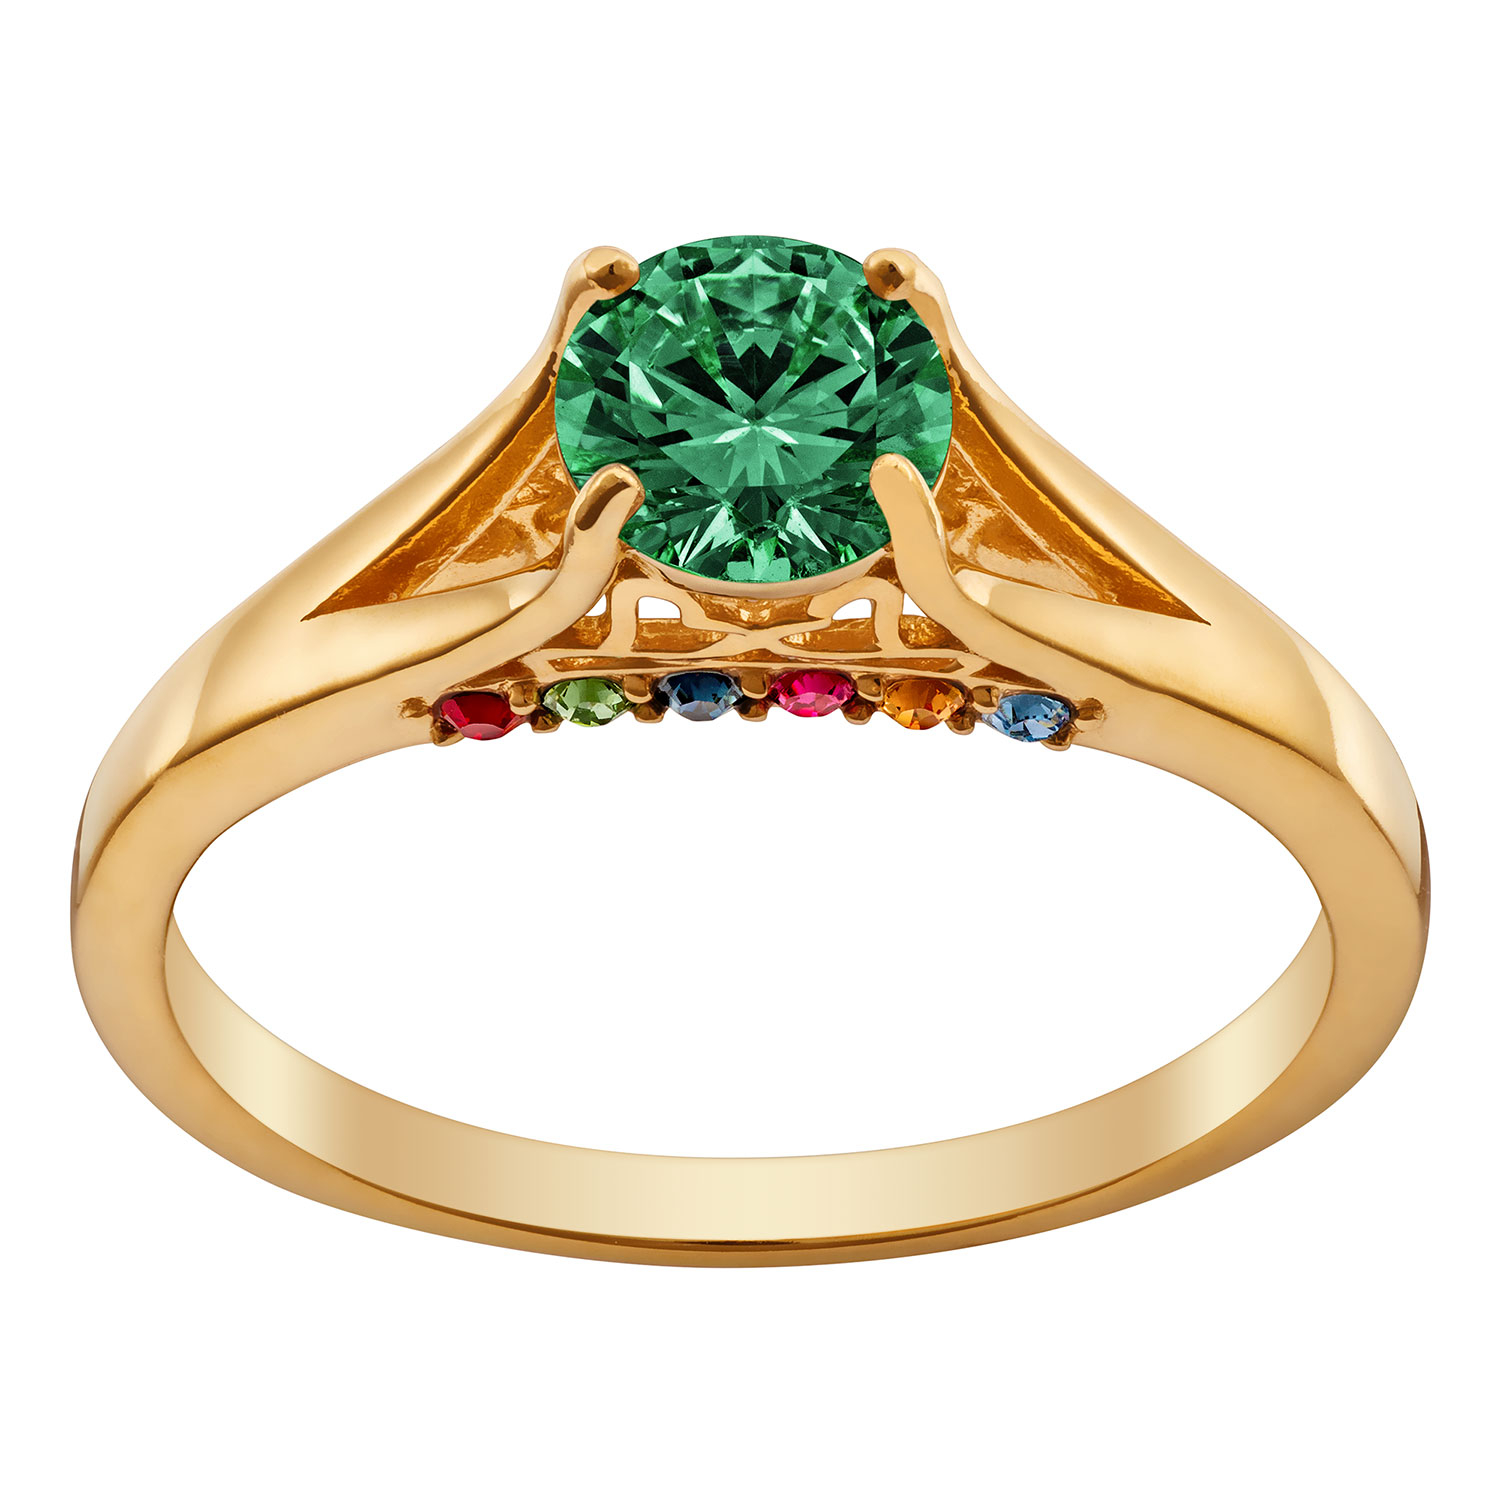 Mother's/ Grandmother's Birthstone Ring